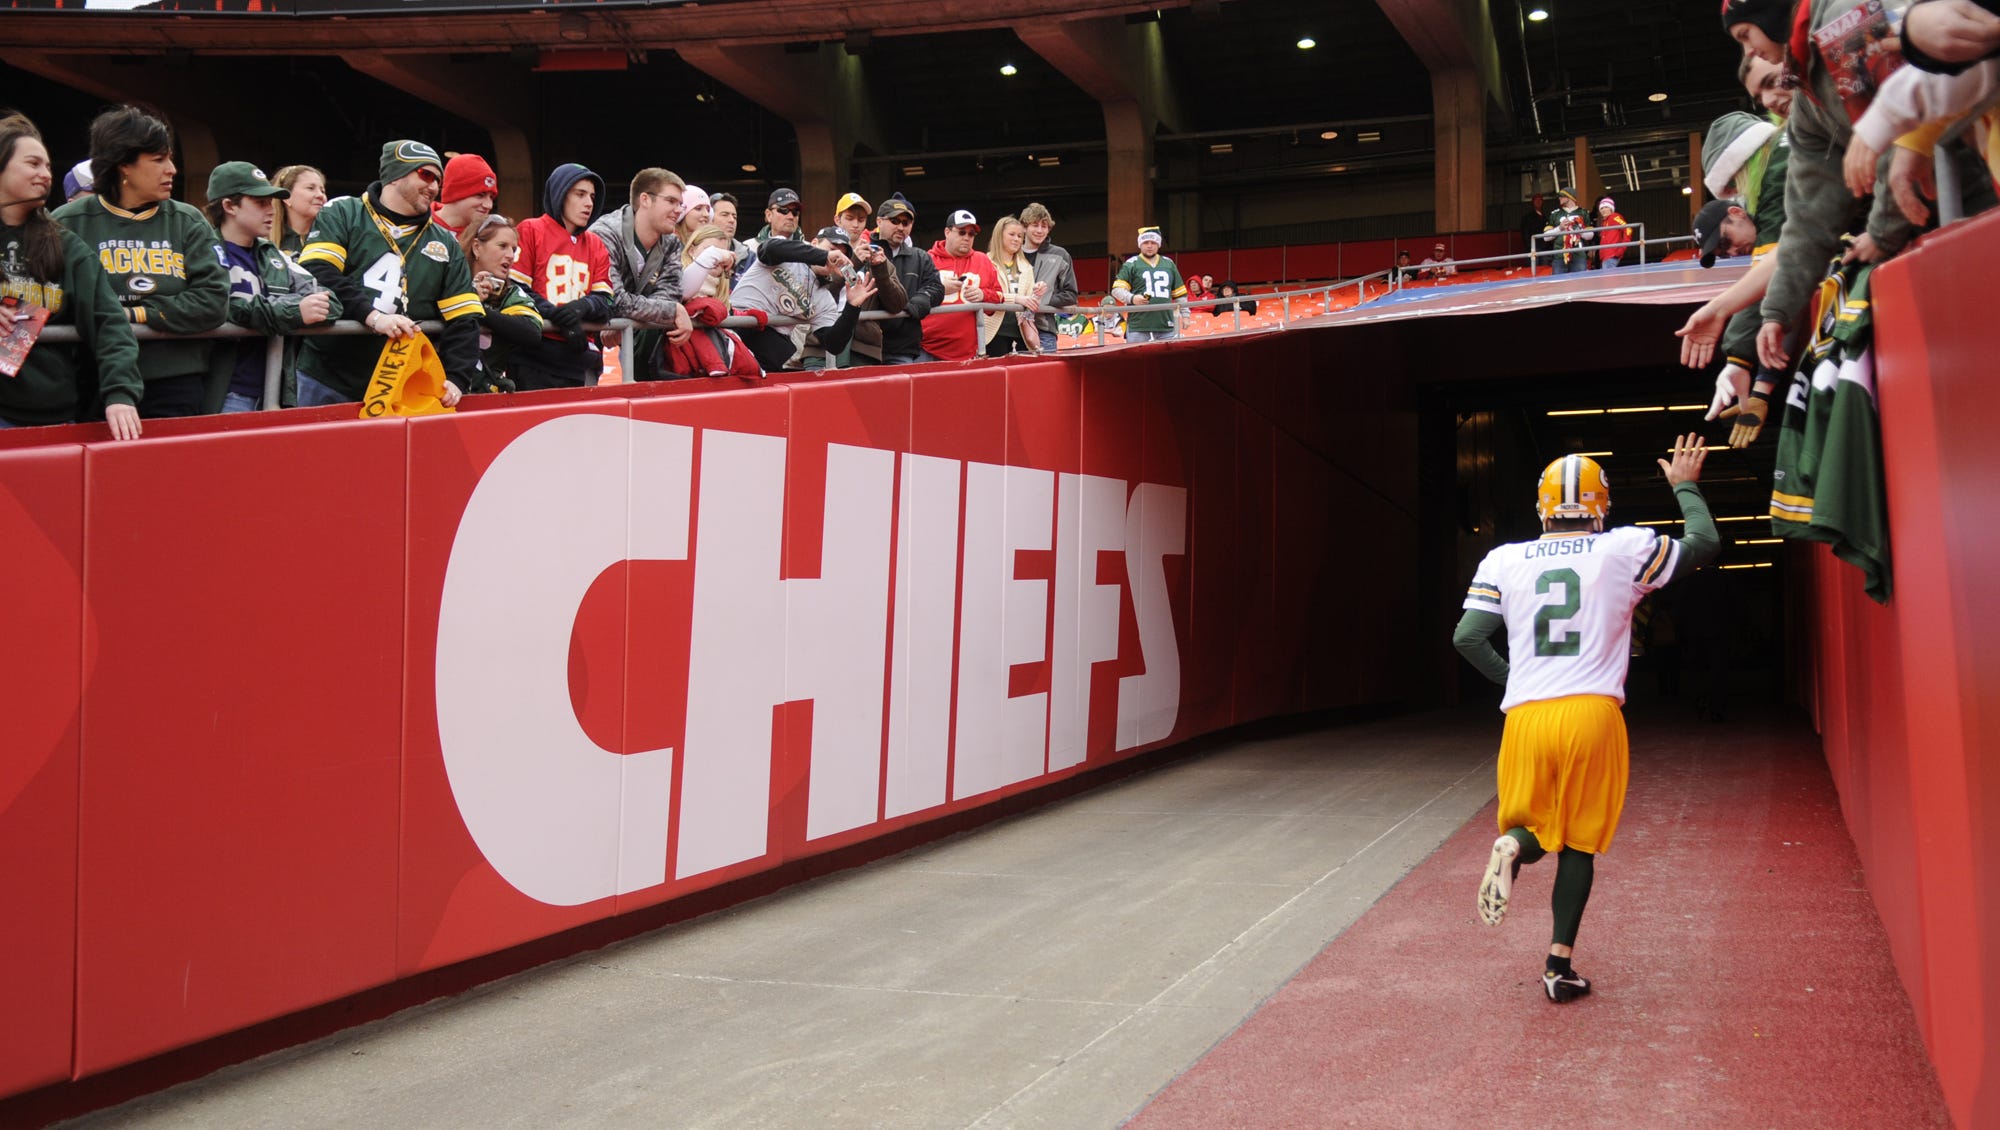 Green Bay Packers kicker Mason Crosby (2) gives high-fives to fans as he runs into the tunnel before the game against the Kansas City Chiefs on Dec. 18, 2011, at Arrowhead Stadium in Kansas City, Mo.